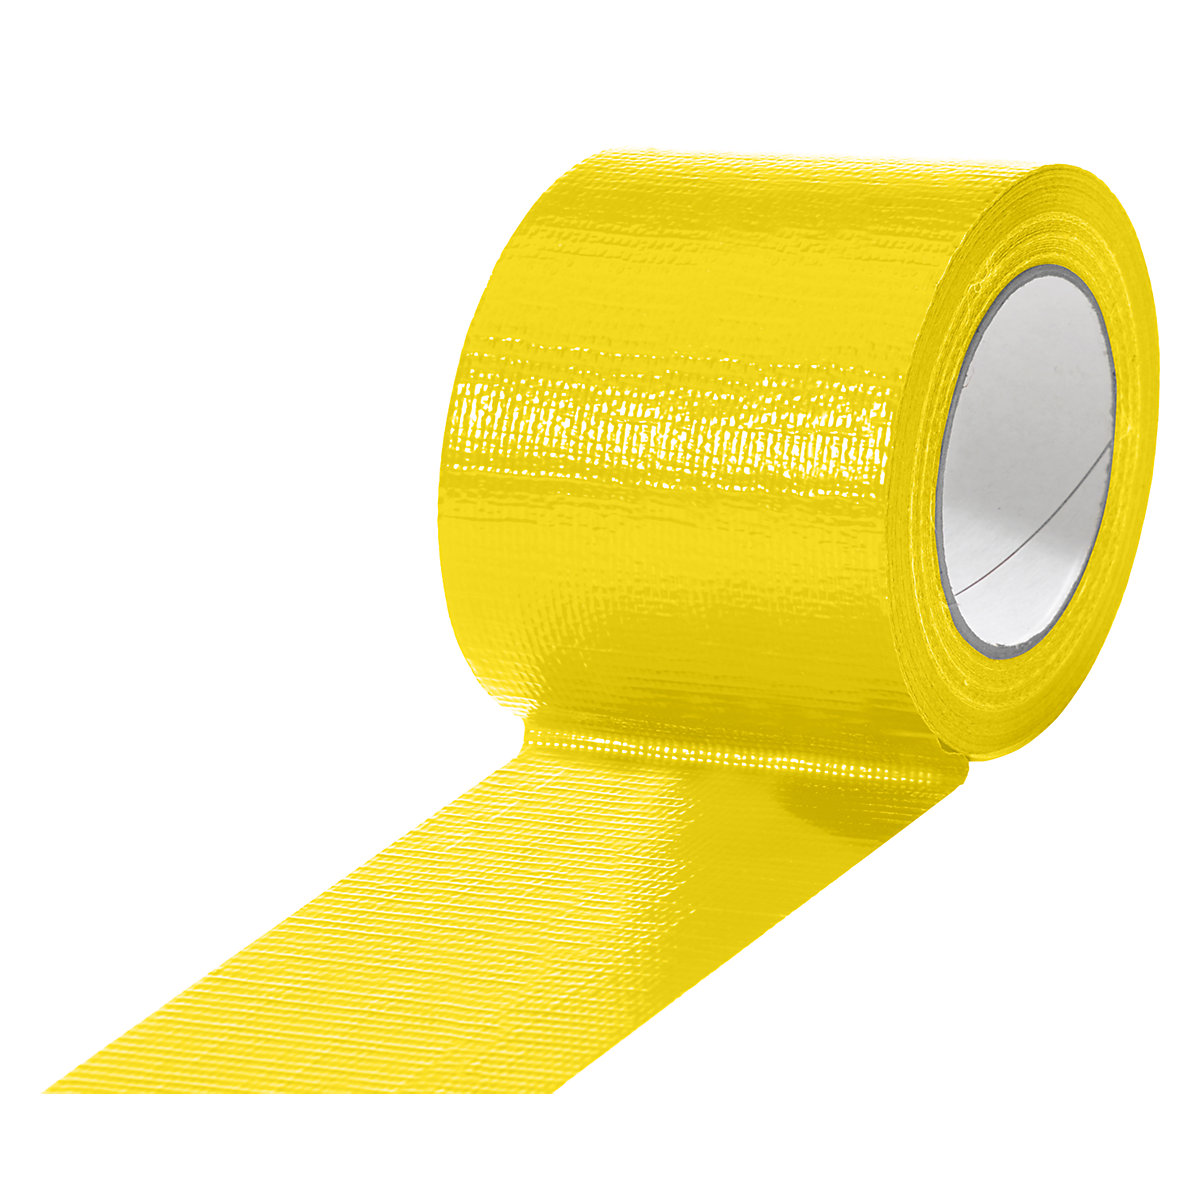 Fabric tape, in different colours, pack of 12 rolls, yellow, tape width 75 mm-20